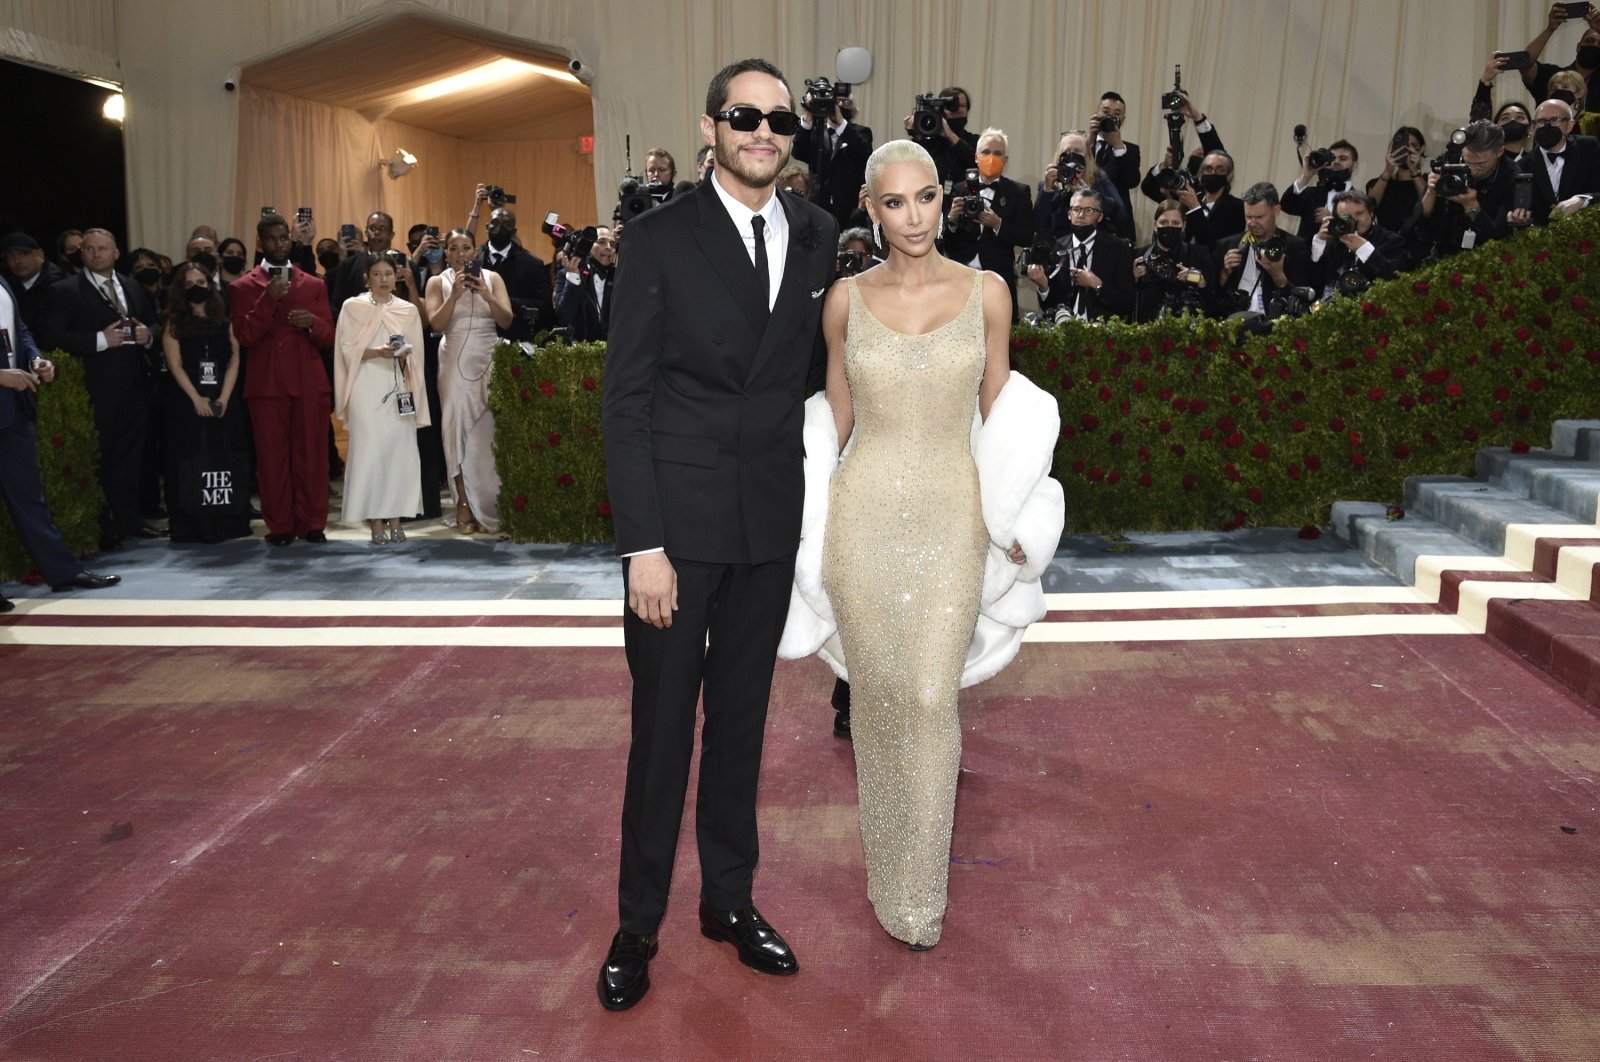 Kim Kardashian (R) and Pete Davidson attend the Metropolitan Museum of Art&#039;s Costume Institute benefit gala celebrating the opening of the &quot;In America: An Anthology of Fashion&quot; exhibition, New York, U.S., May 2, 2022. (AFP Photo)